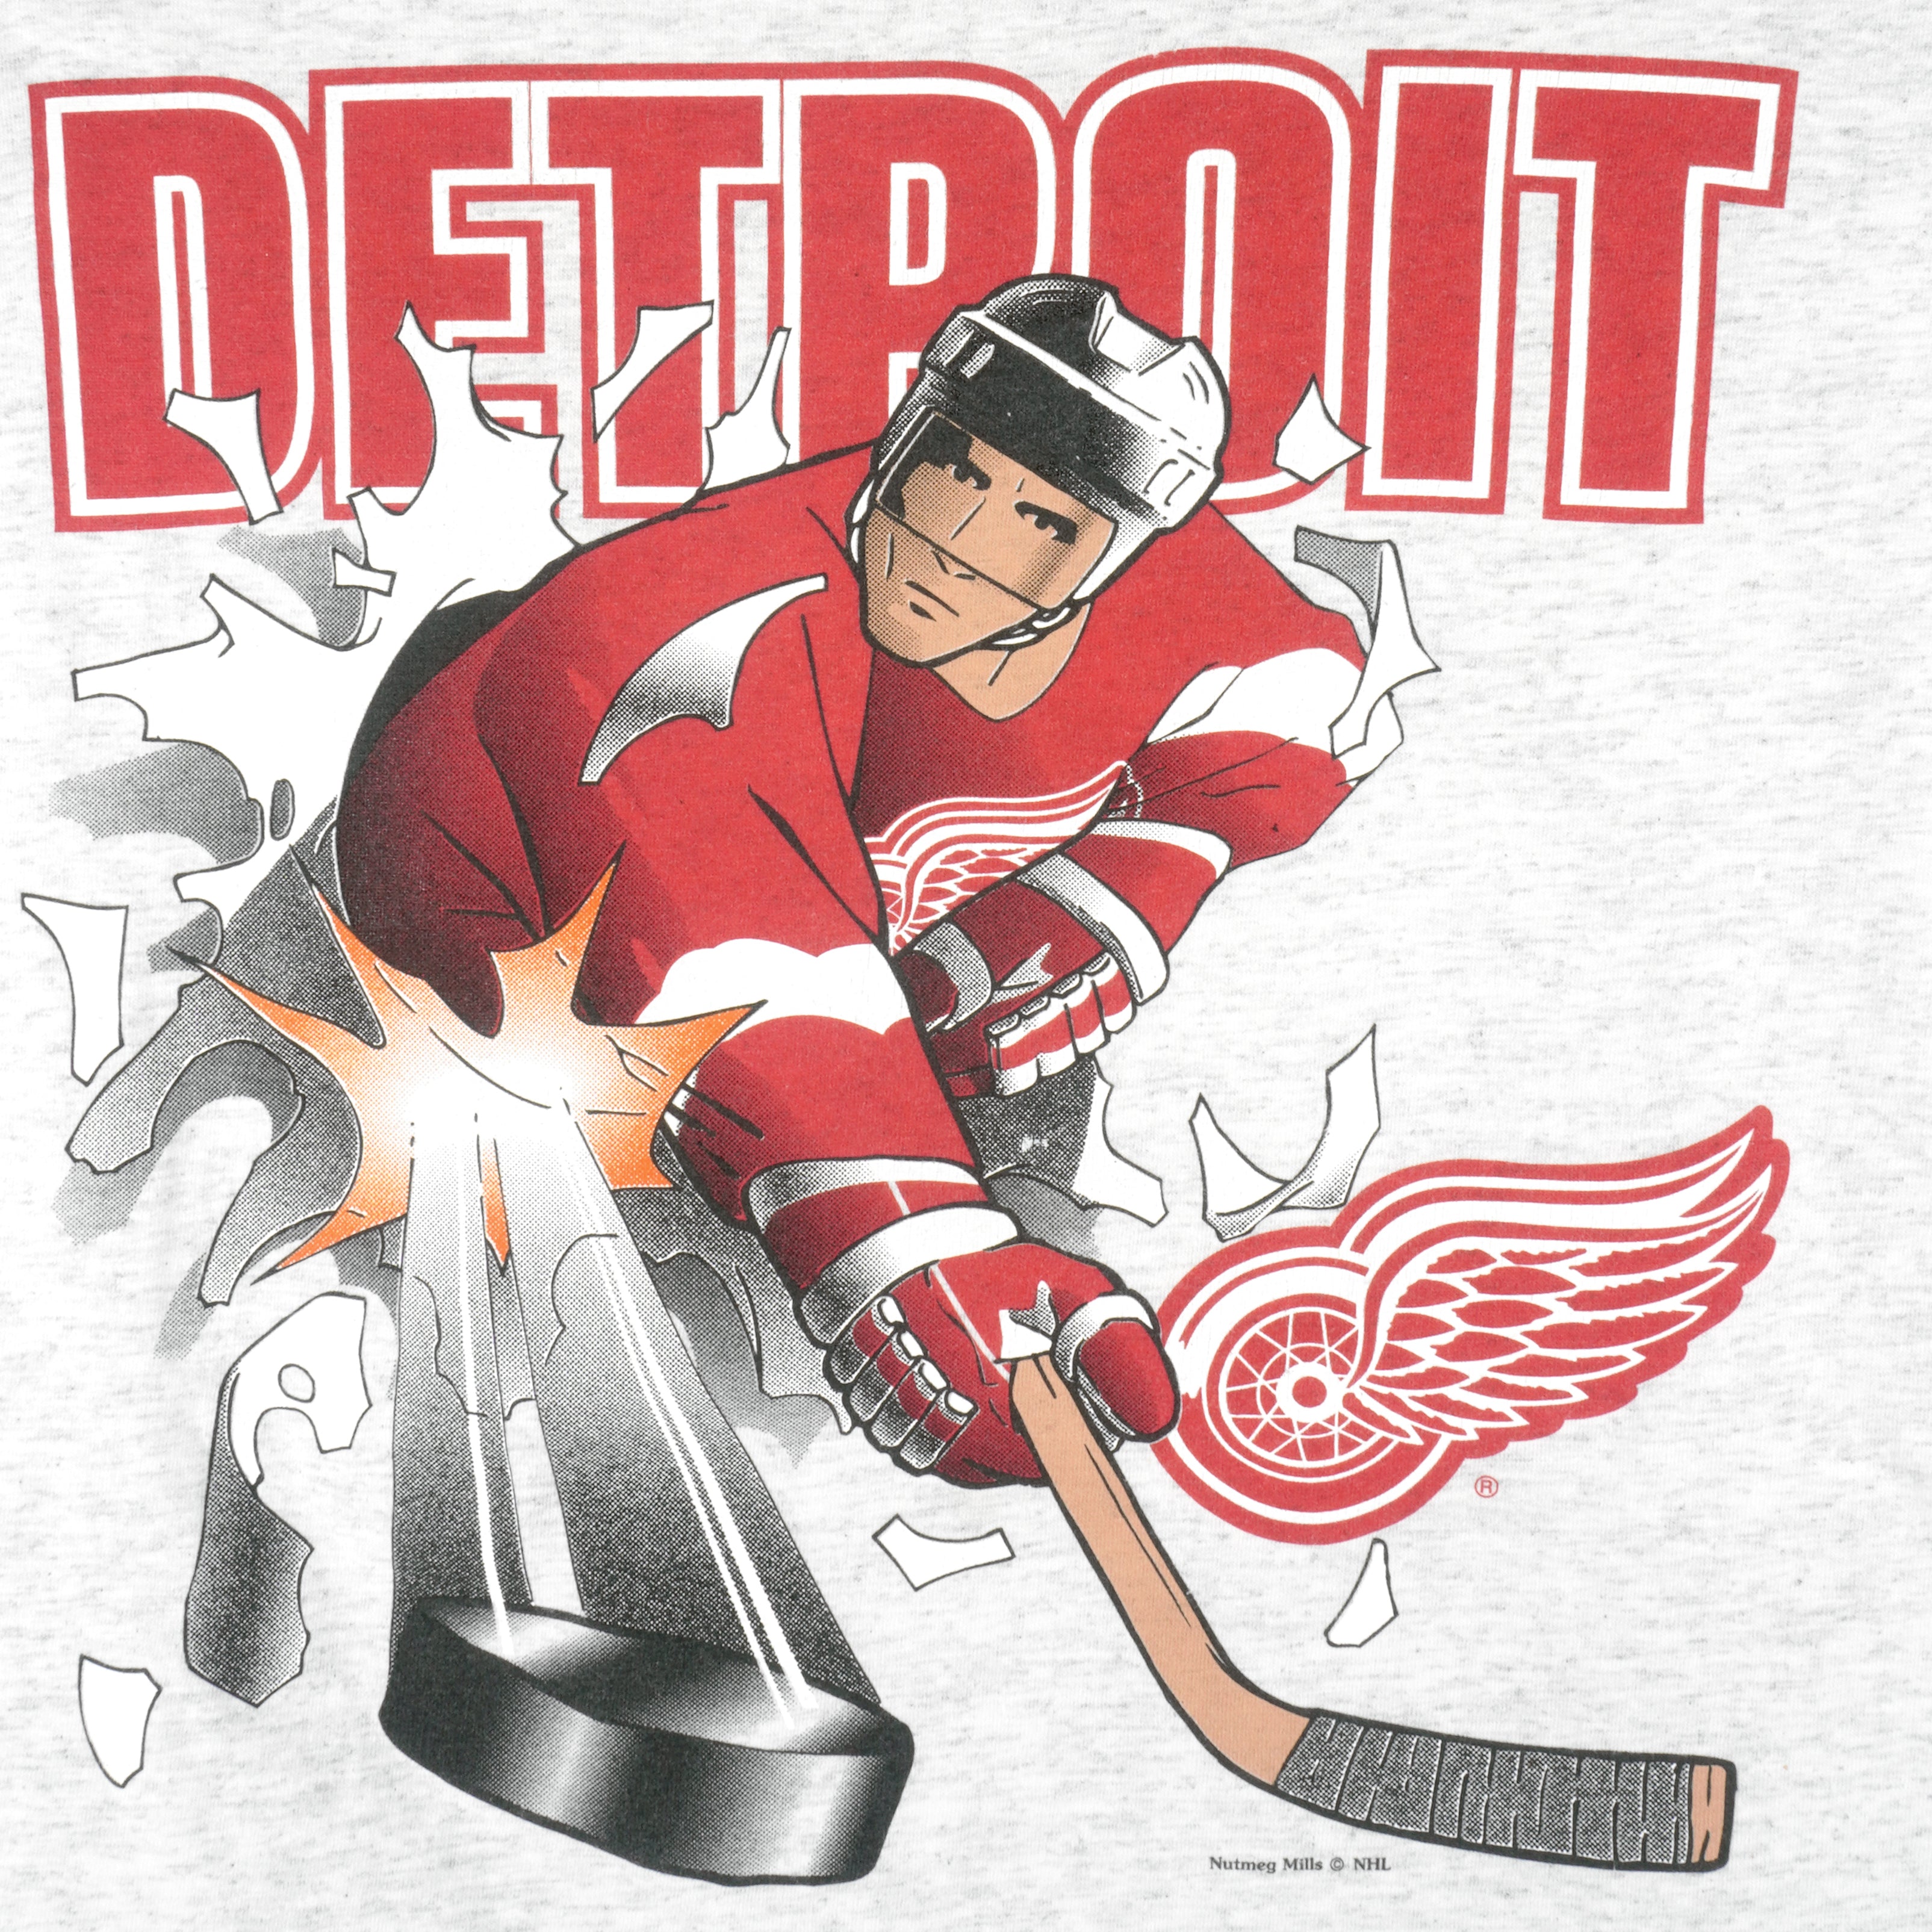 Nhl shop detroit red wings red against the world shirt, hoodie